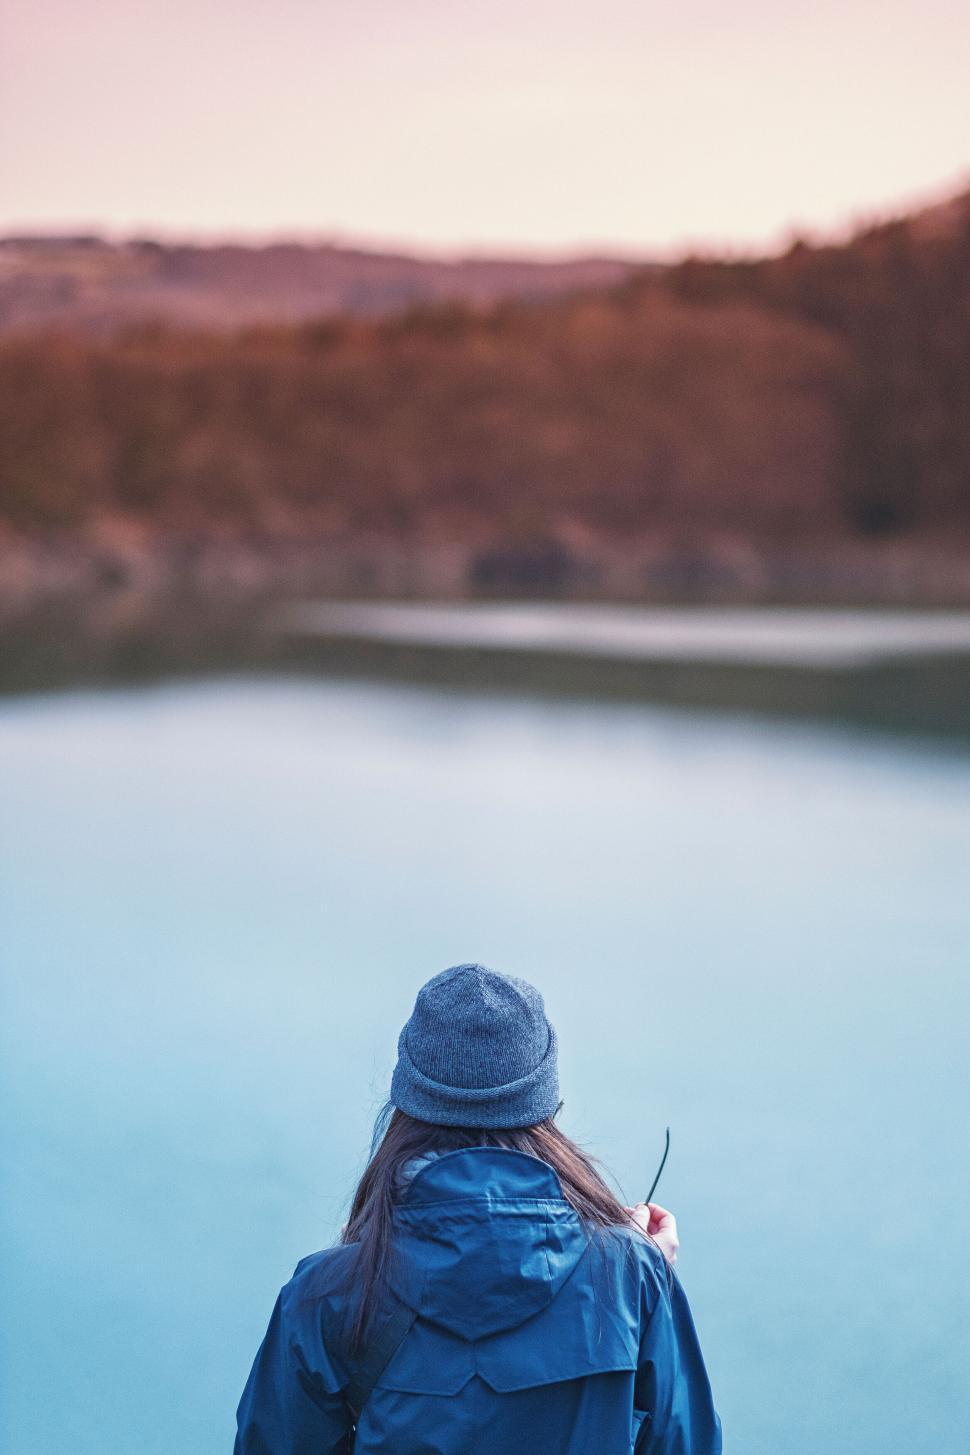 Free Image of Dreamy image of woman overlooking a tranquil lake 